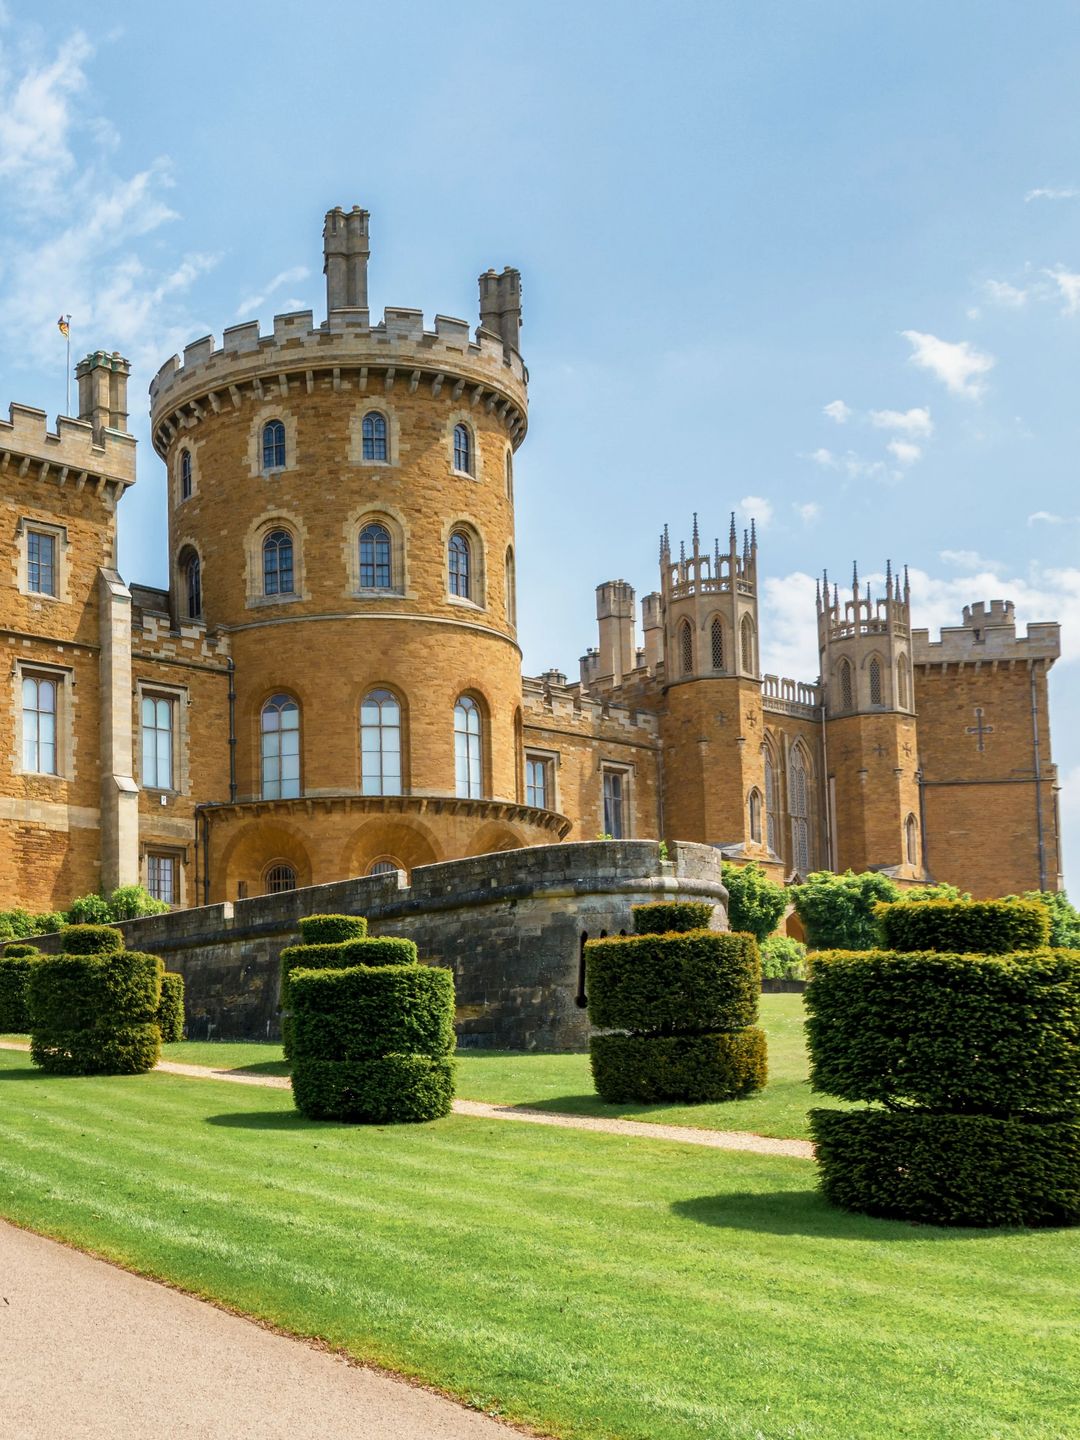 Belvoir Castle (pronounced 'Beaver' btw) and its 16,000-acre estate is run by Emma Manners, the Duchess of Rutland